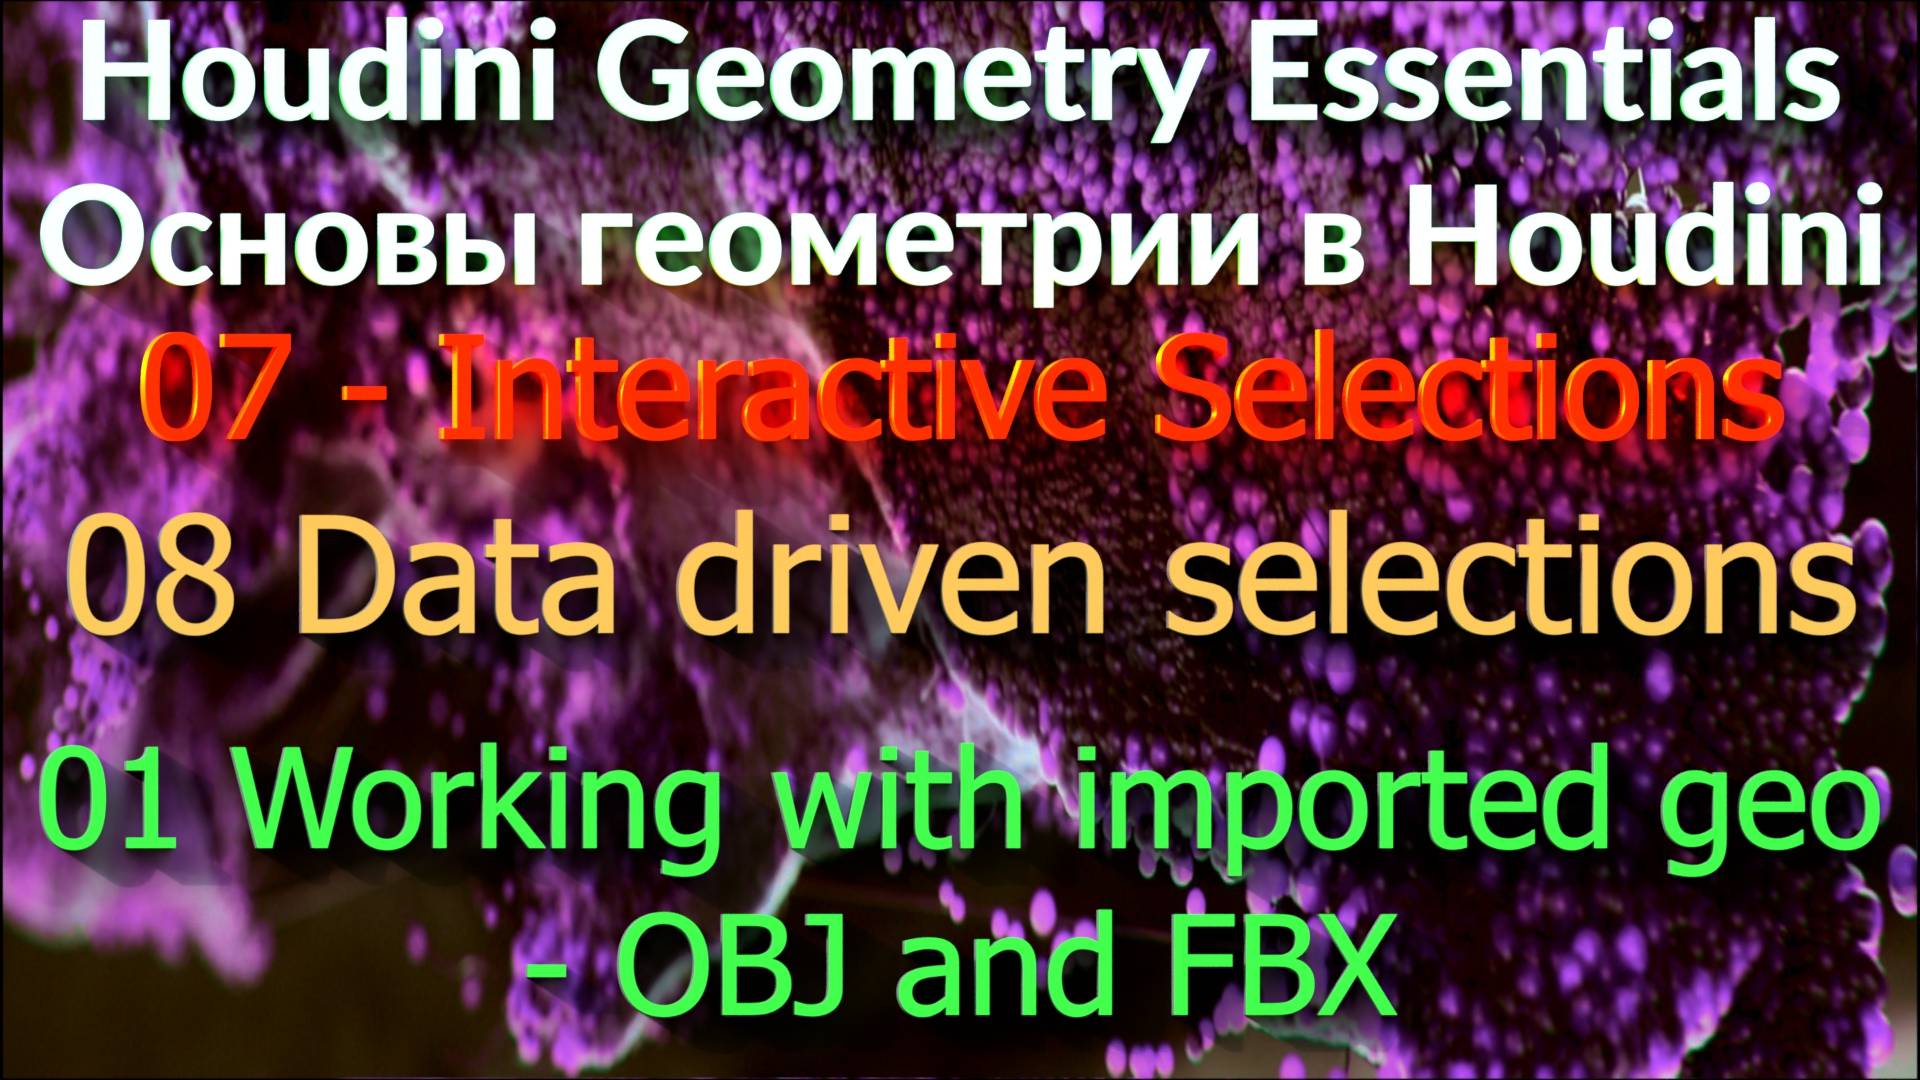 07_08_01 Working with imported geo - OBJ and FBX